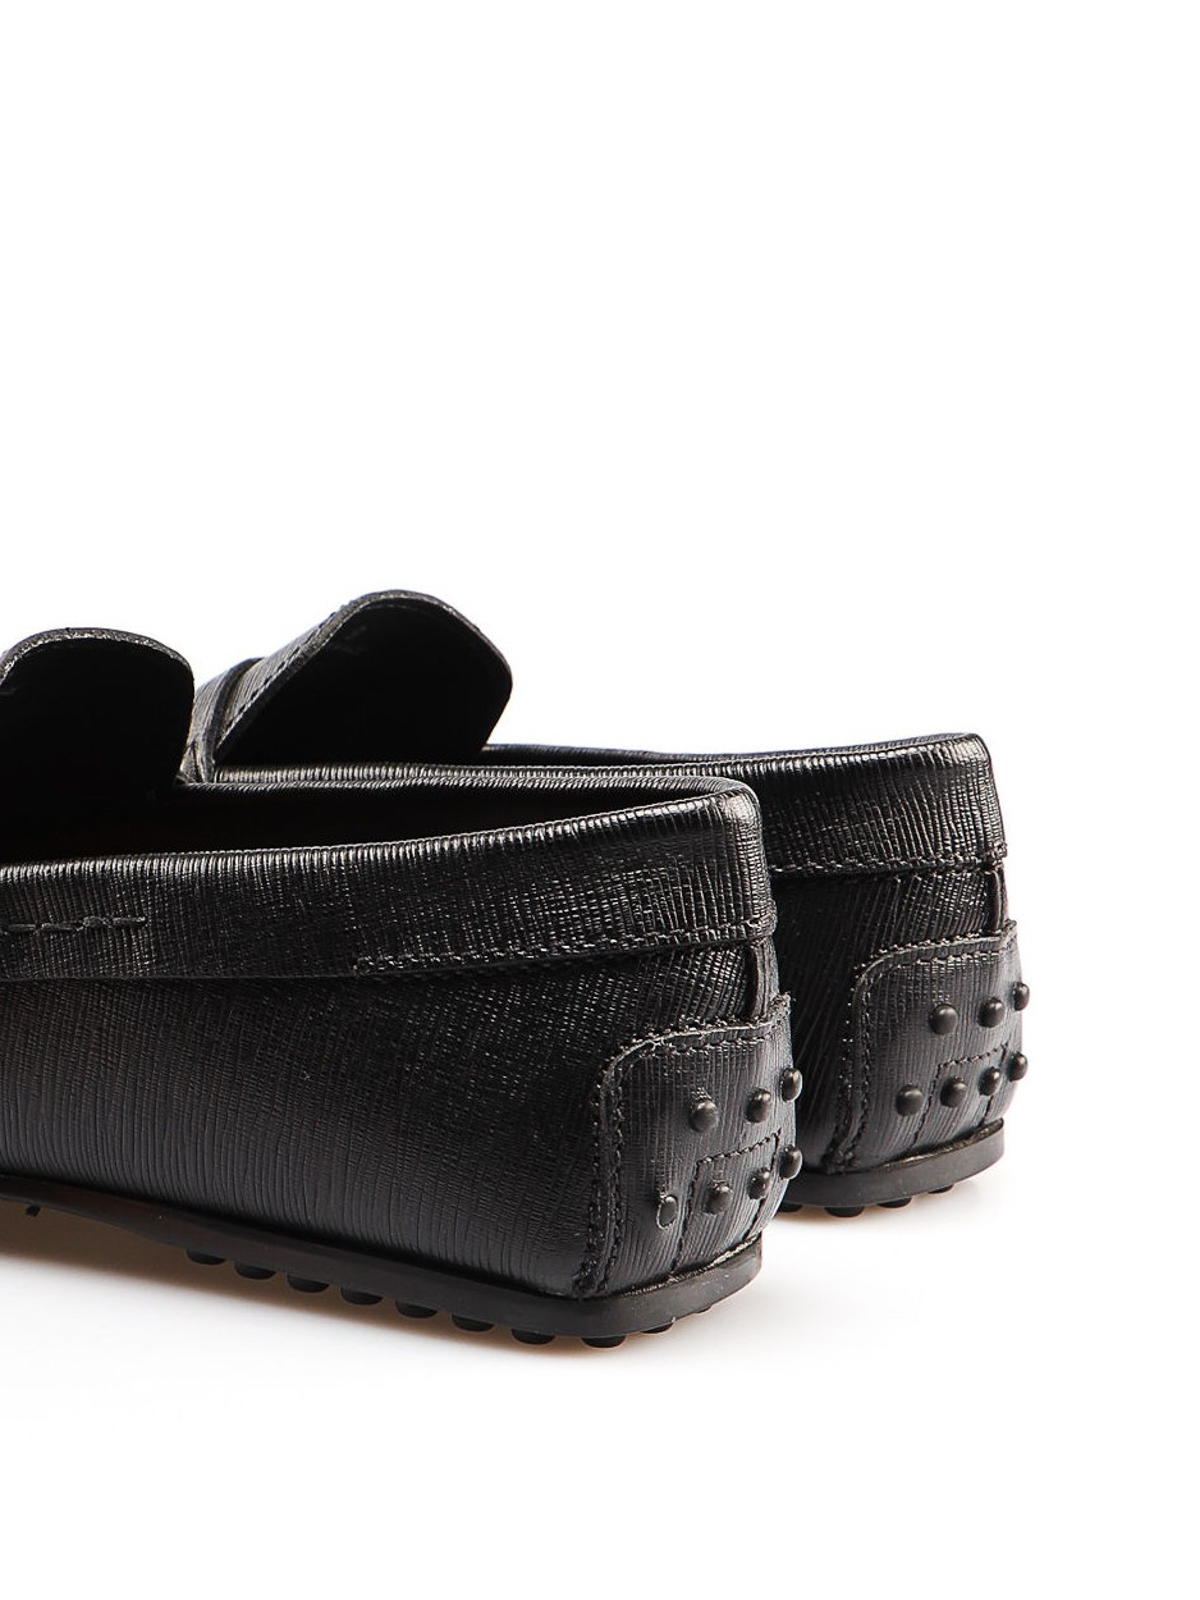 Loafers & Slippers Tod'S - City black leather loafers 